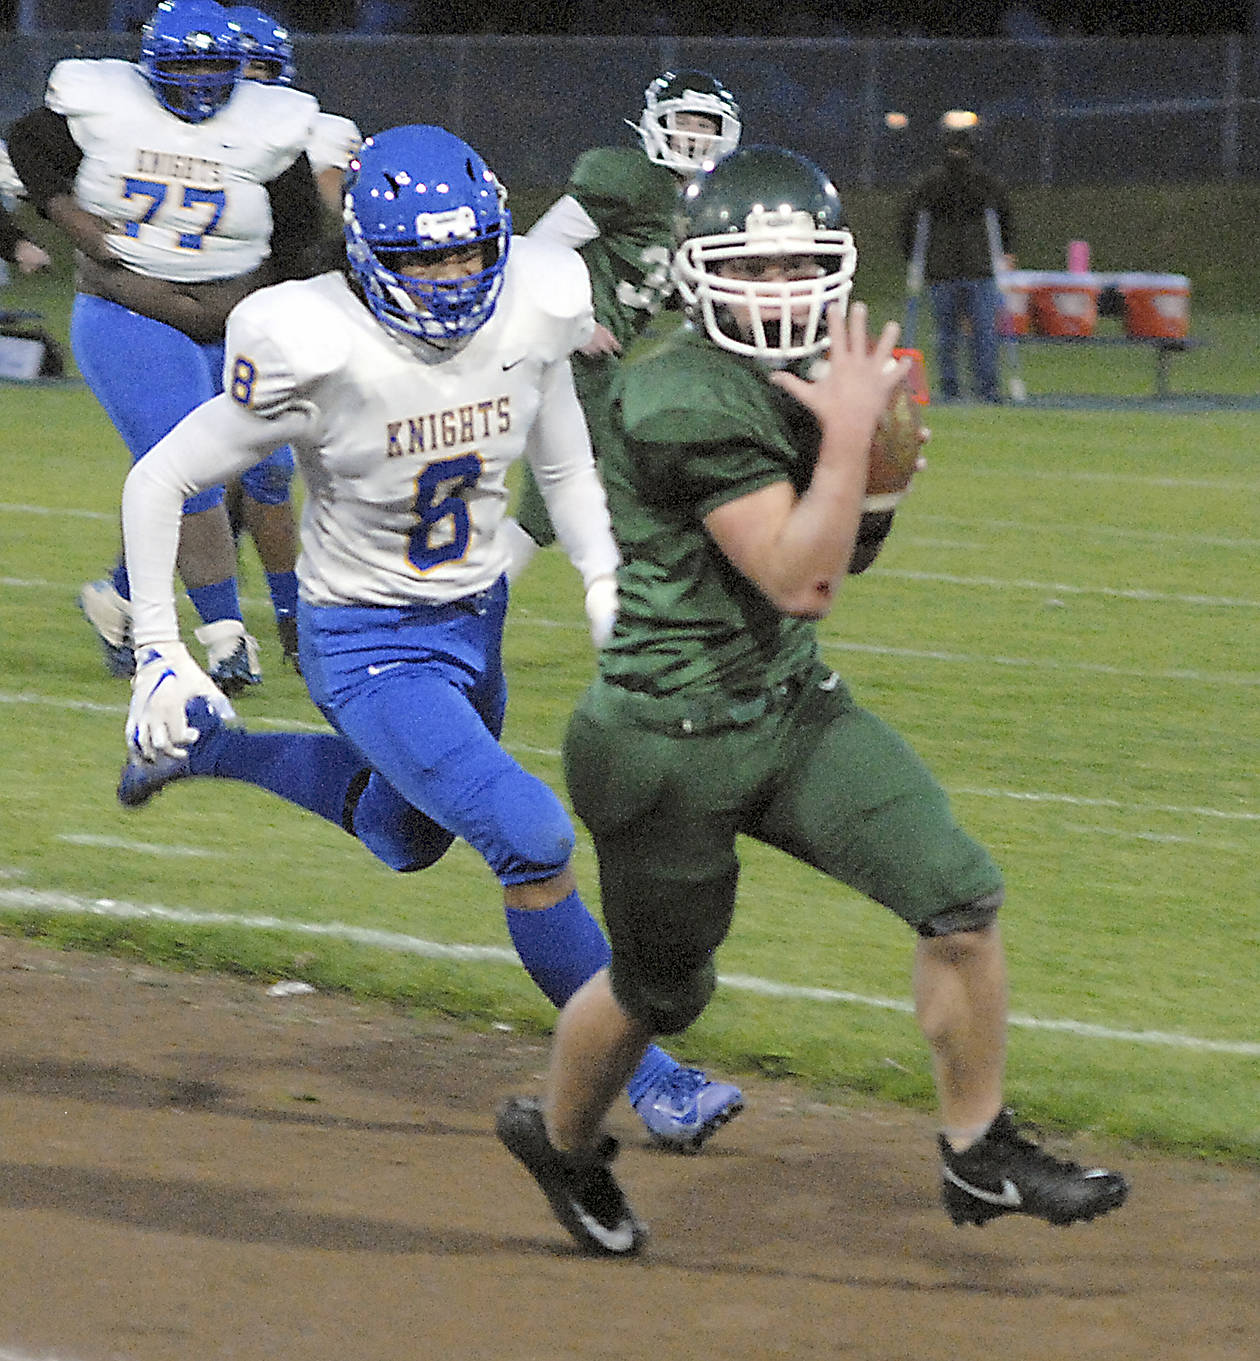 Keith Thorpe/Peninsula Daily News Port Angeles wide receiver Nolan Hughes brings down a pass and is immediately pursued by Bremerton’s Kaipo Retome on Friday night at Port Angeles Civic Field.